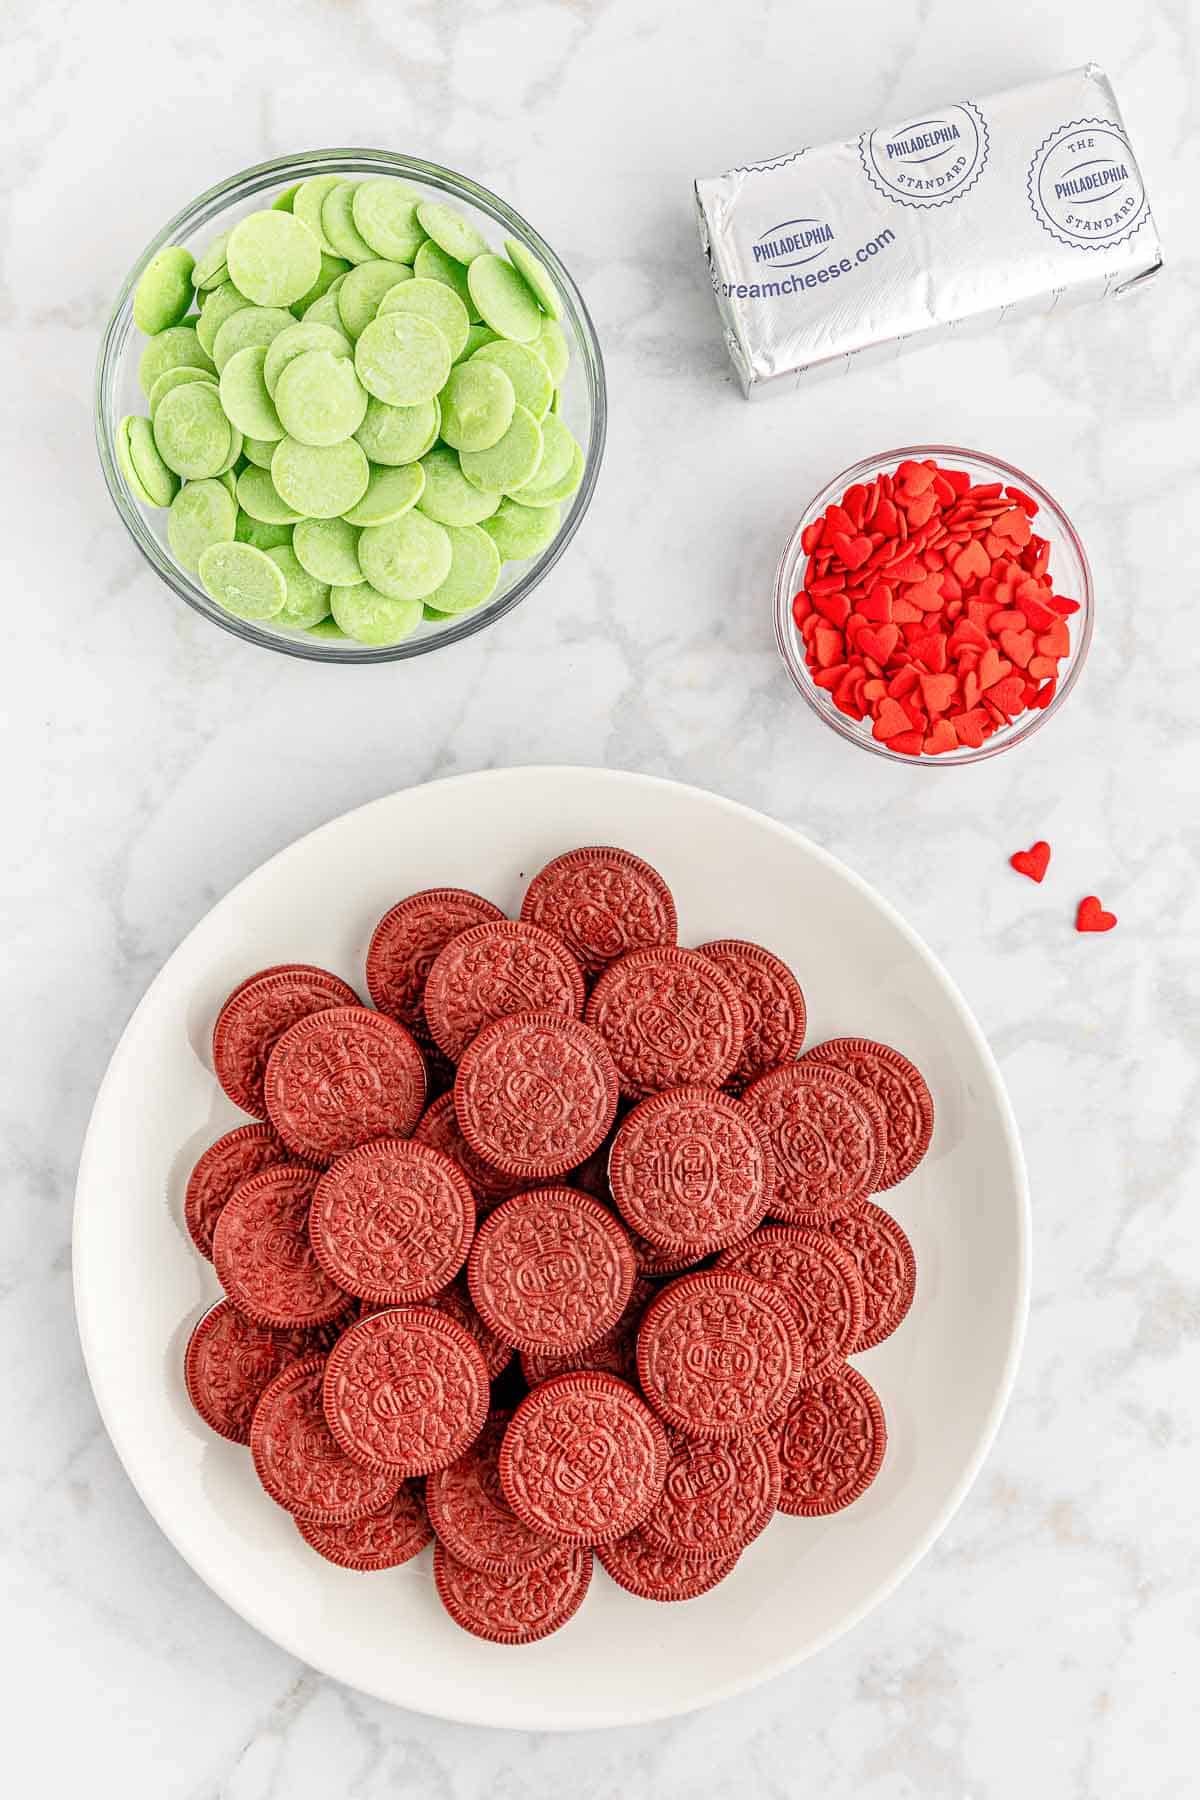 ingredients for grinch oreo cookie truffles on a marble countertop - white plate full of red velvet oreos, bowl of light green candy melts, red candy hearts and a block of cream cheese.